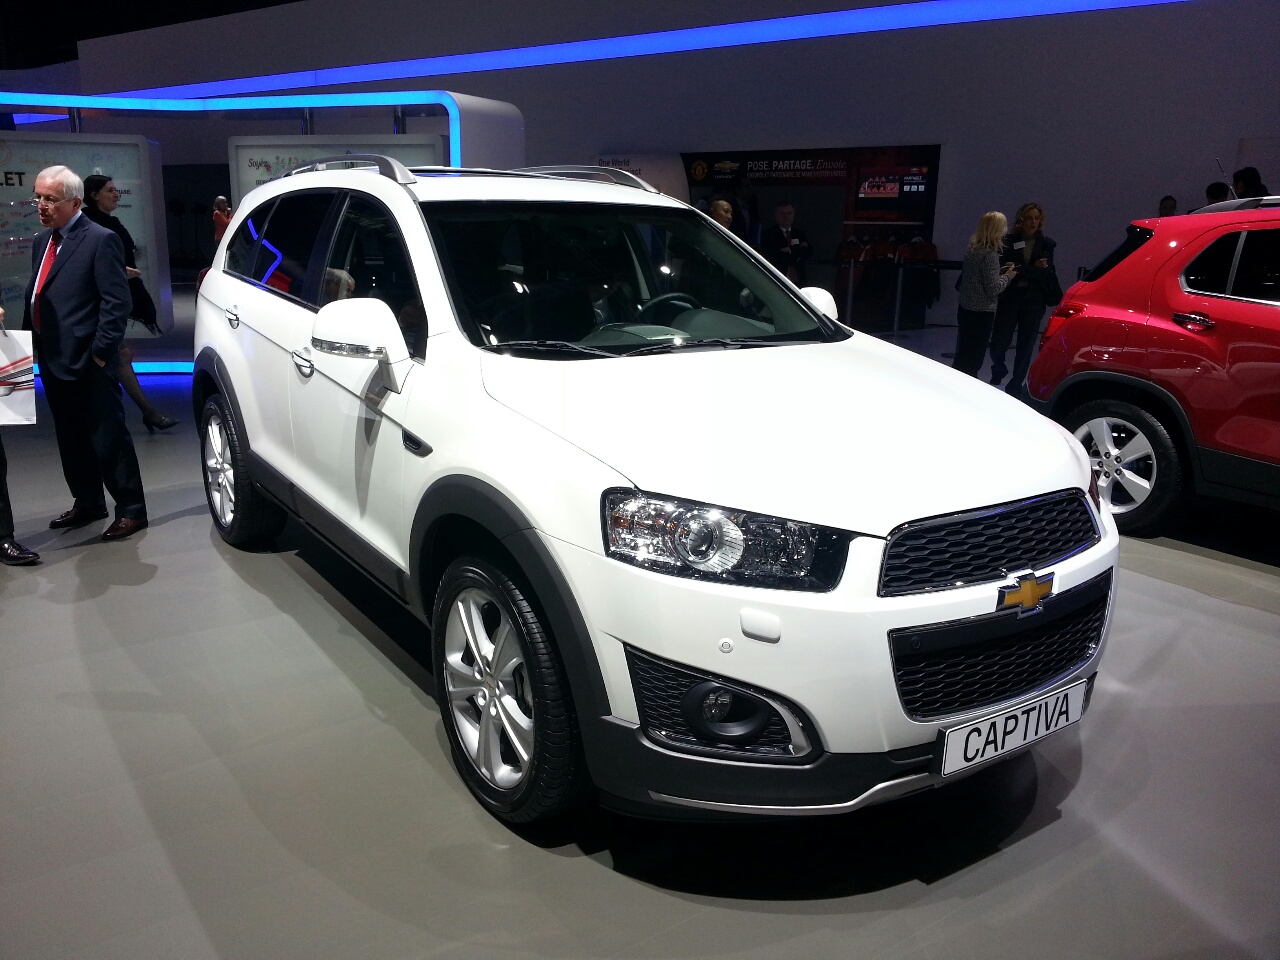 Chevrolet Captiva to get another facelift